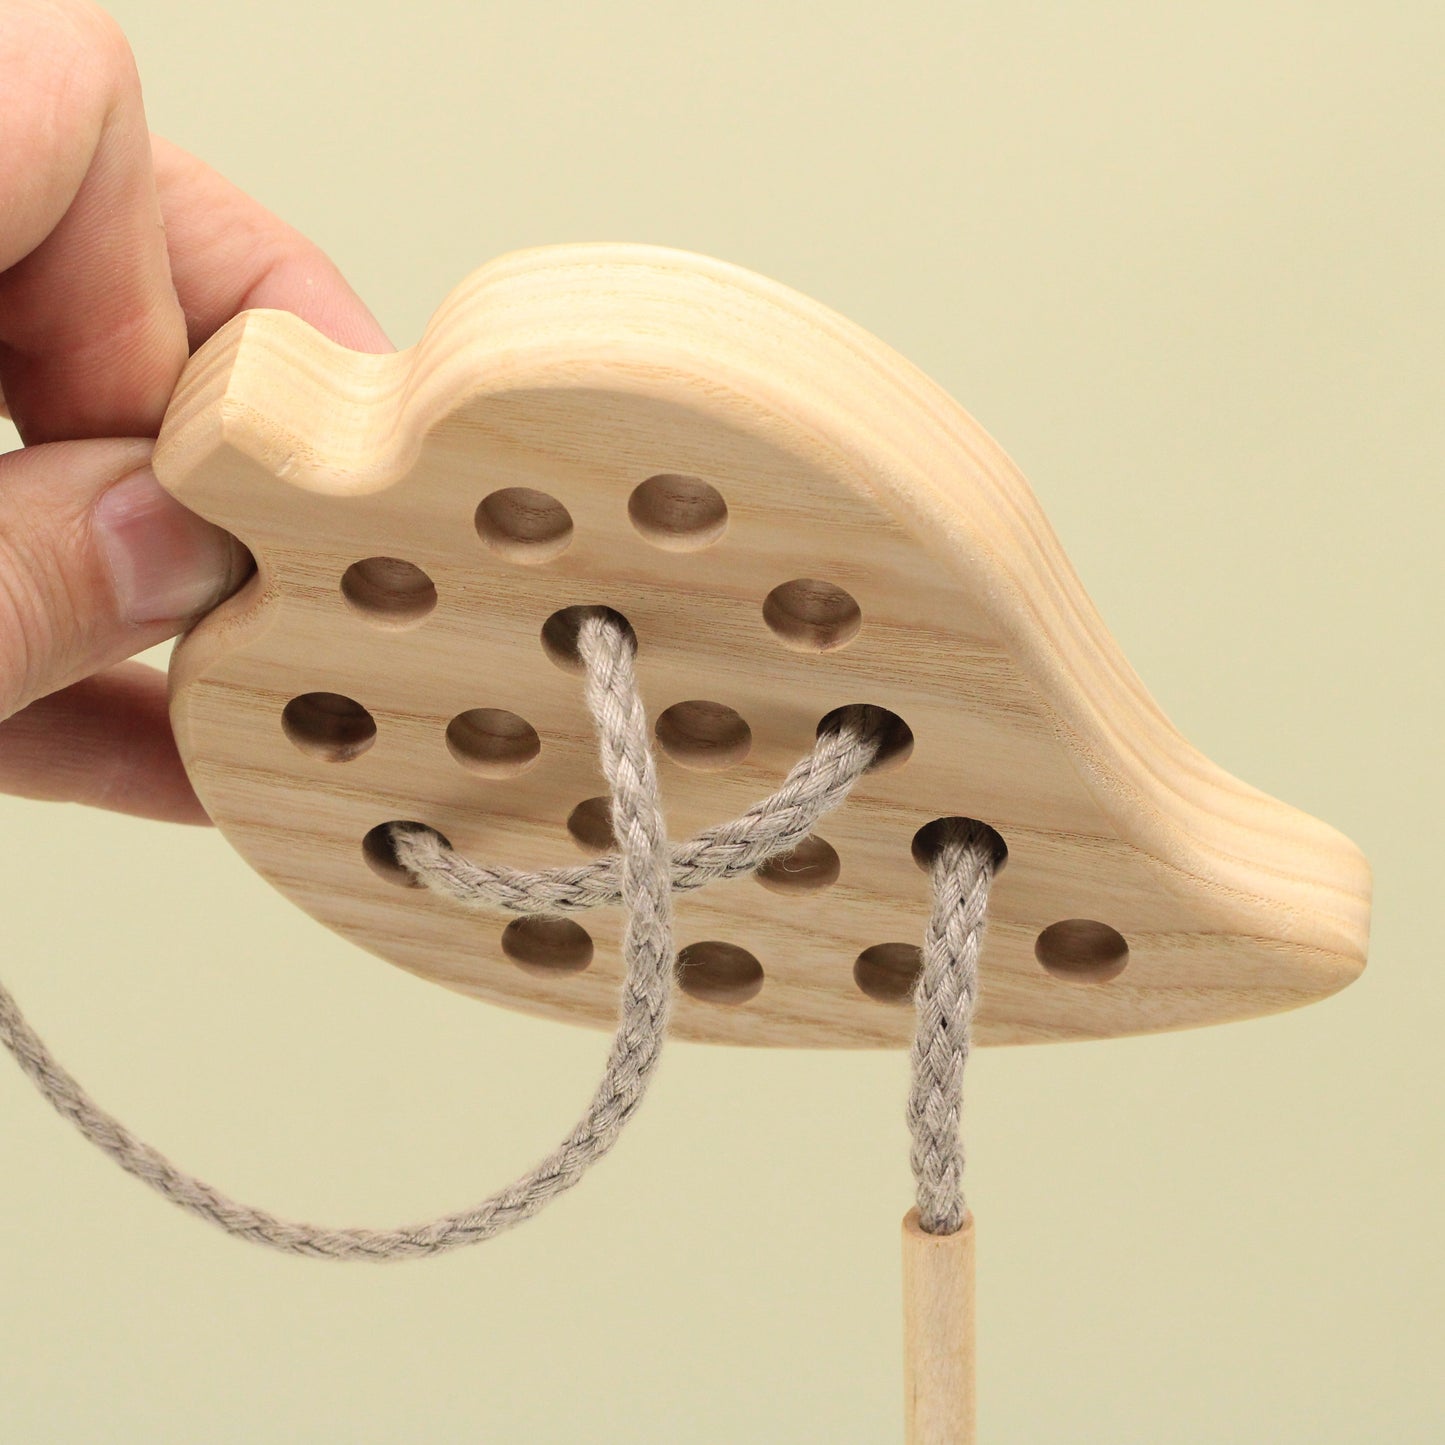 Lotes Toys Natural Wooden Threading Lacing Leaf TT08